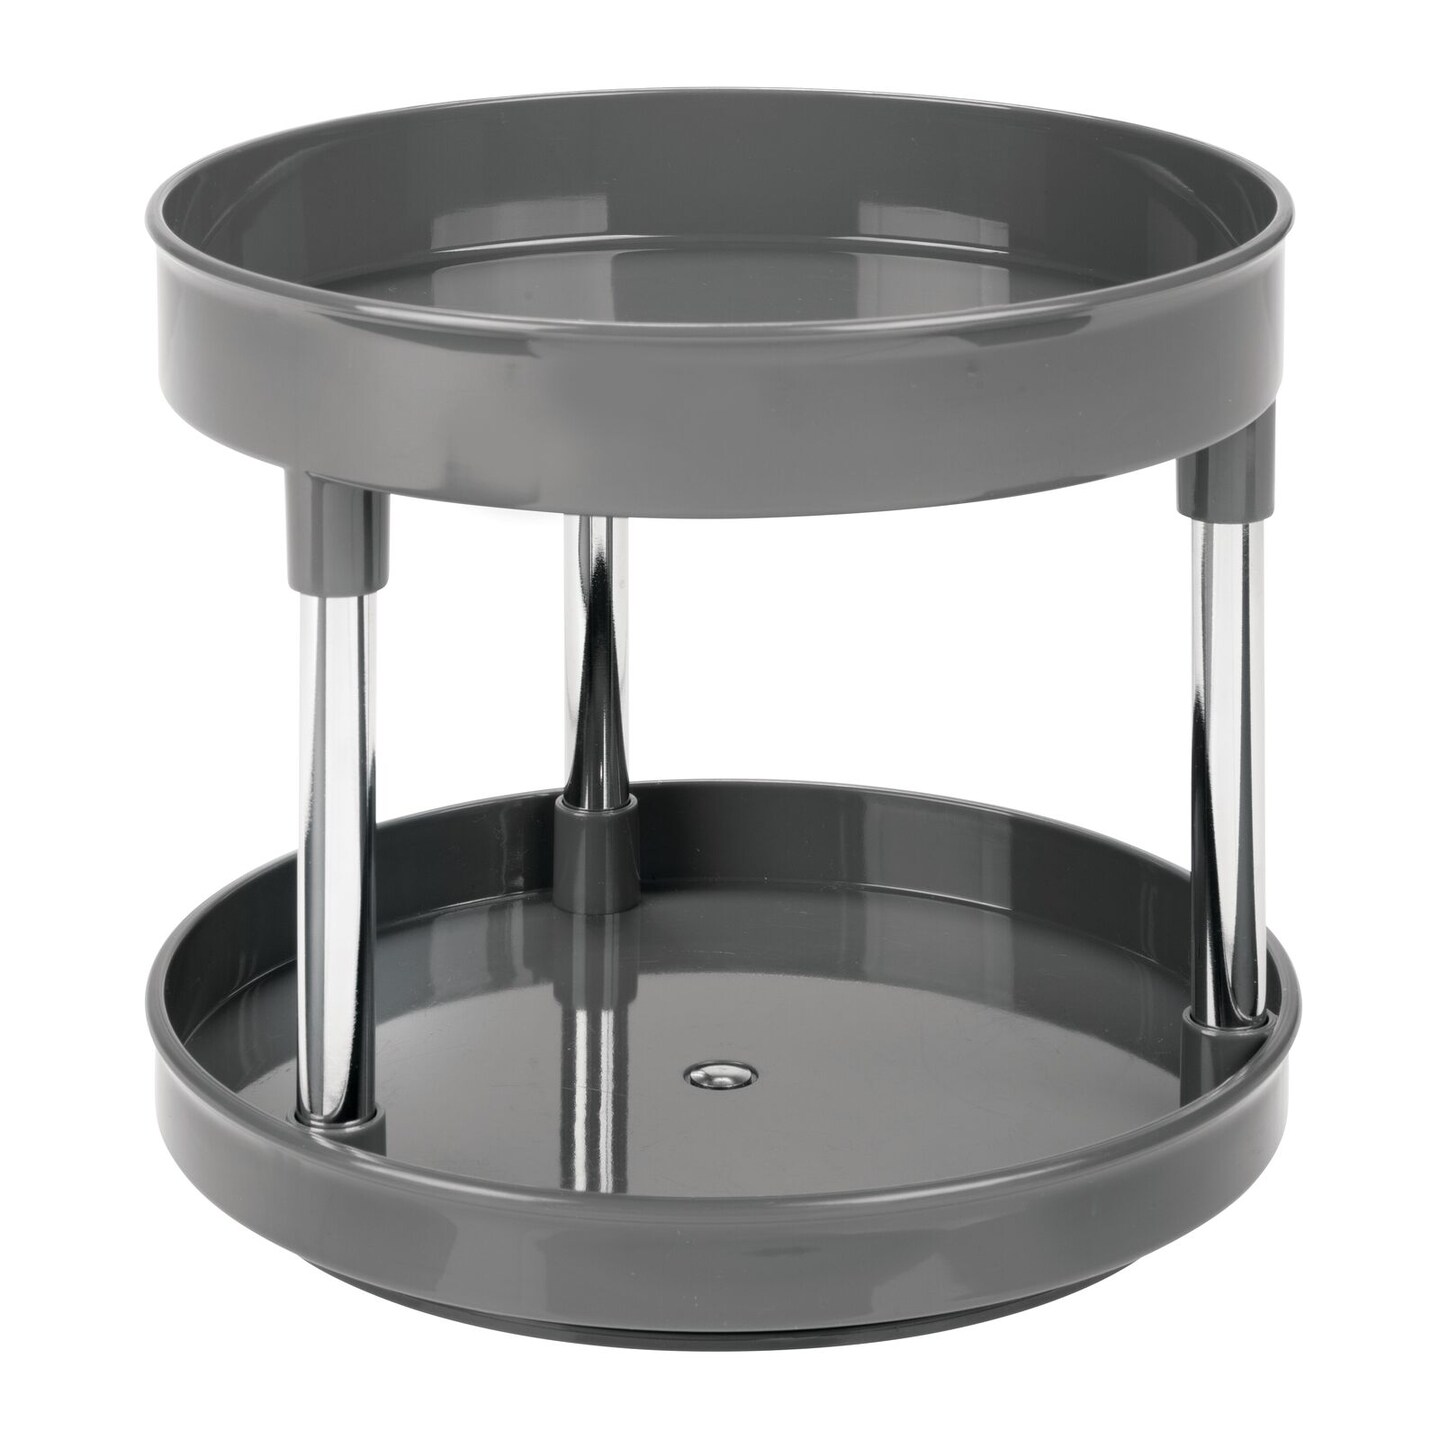 mDesign 2-Tier Lazy Susan for Bathroom Cabinets